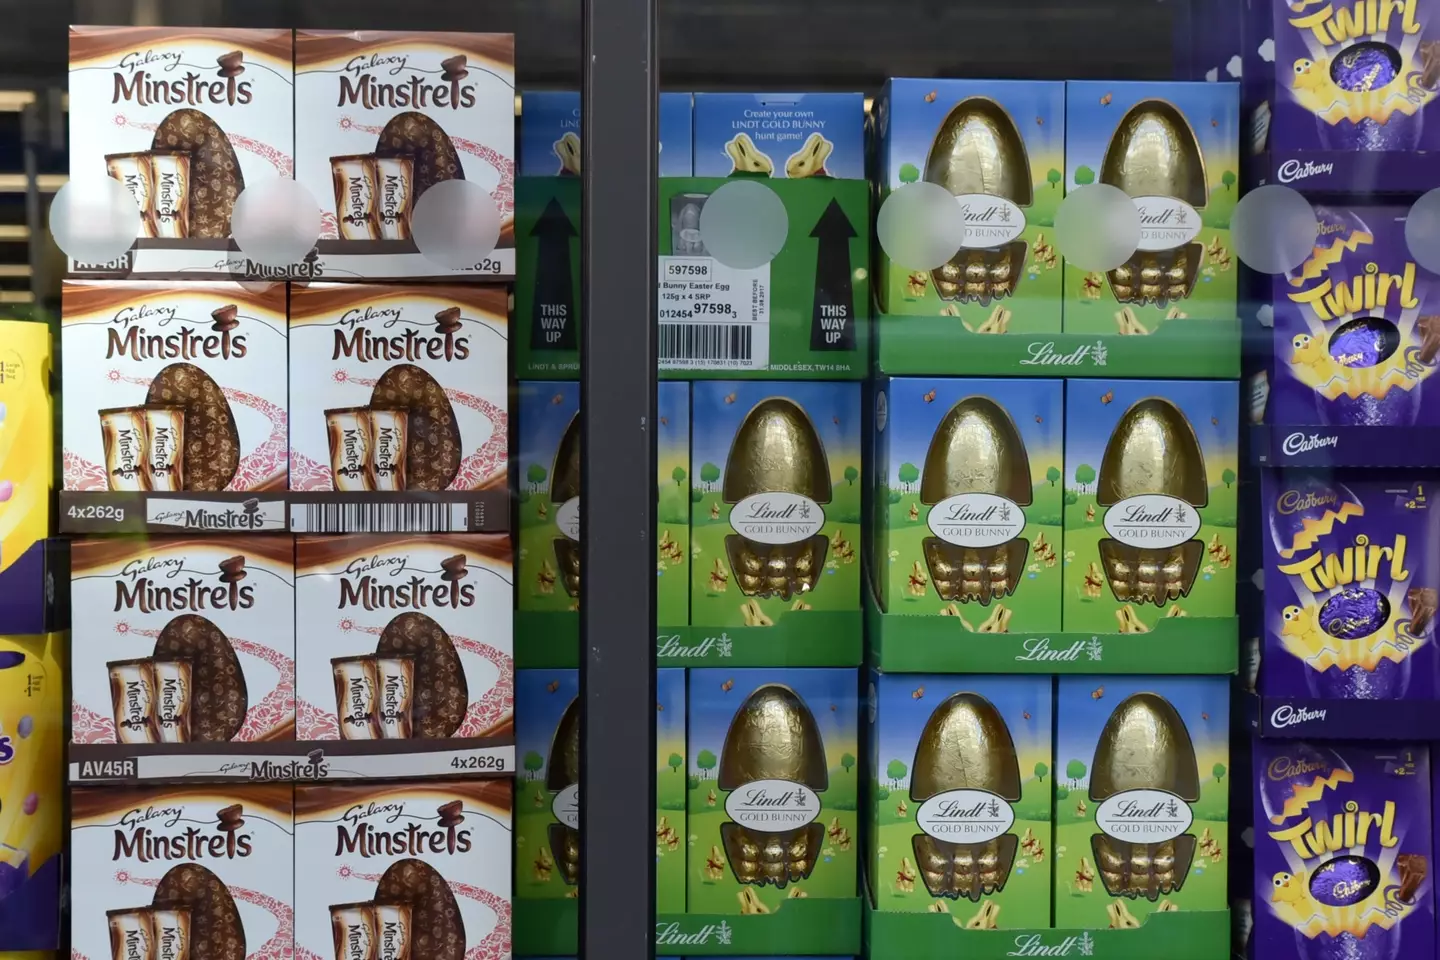 Shops are already brimming with Easter products.